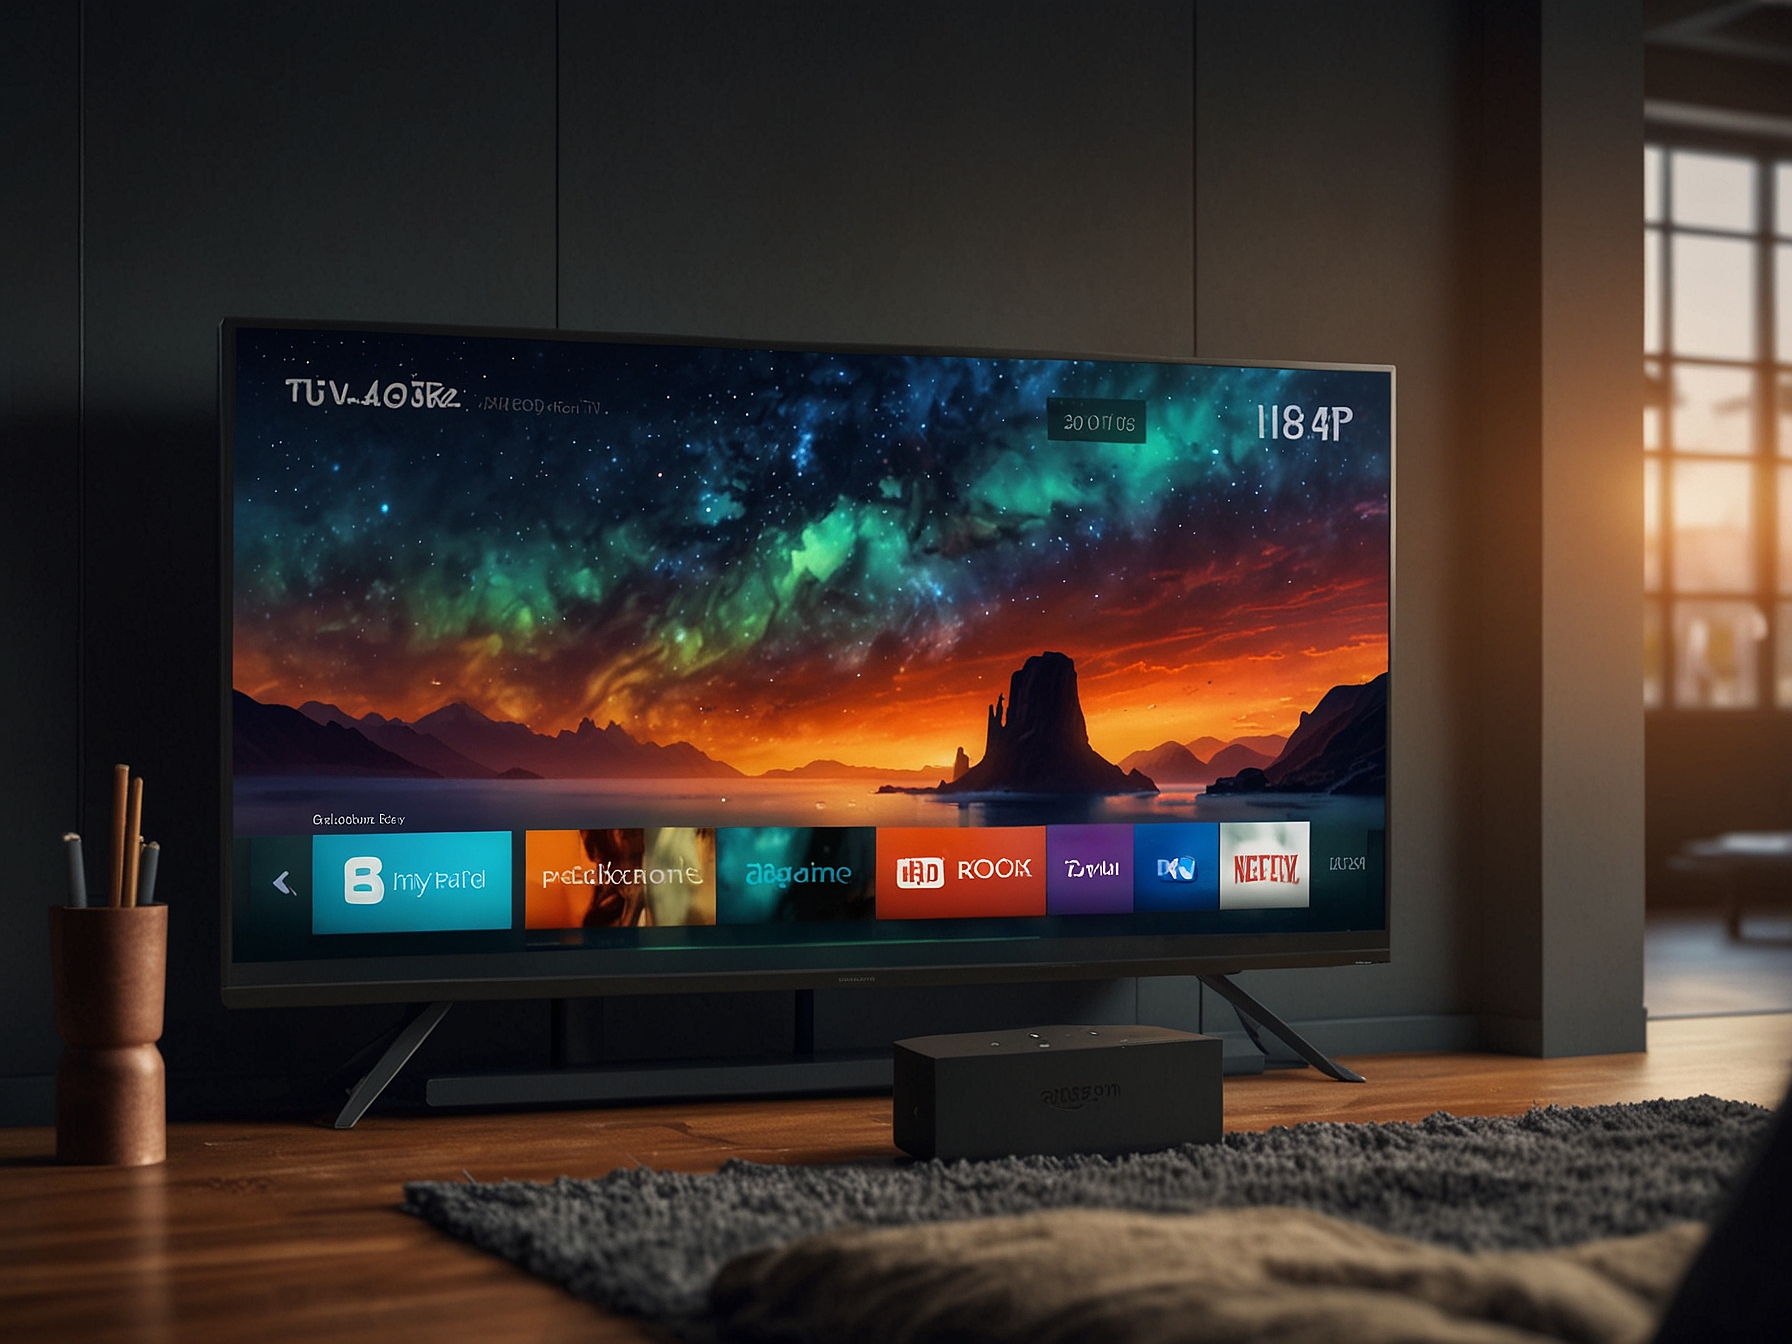 A modern 4K UHD TV with an Amazon Fire TV Stick 4K plugged in, streaming a stunning HDR10+ movie, demonstrating the enhanced colors, contrasts, and 4K resolution.